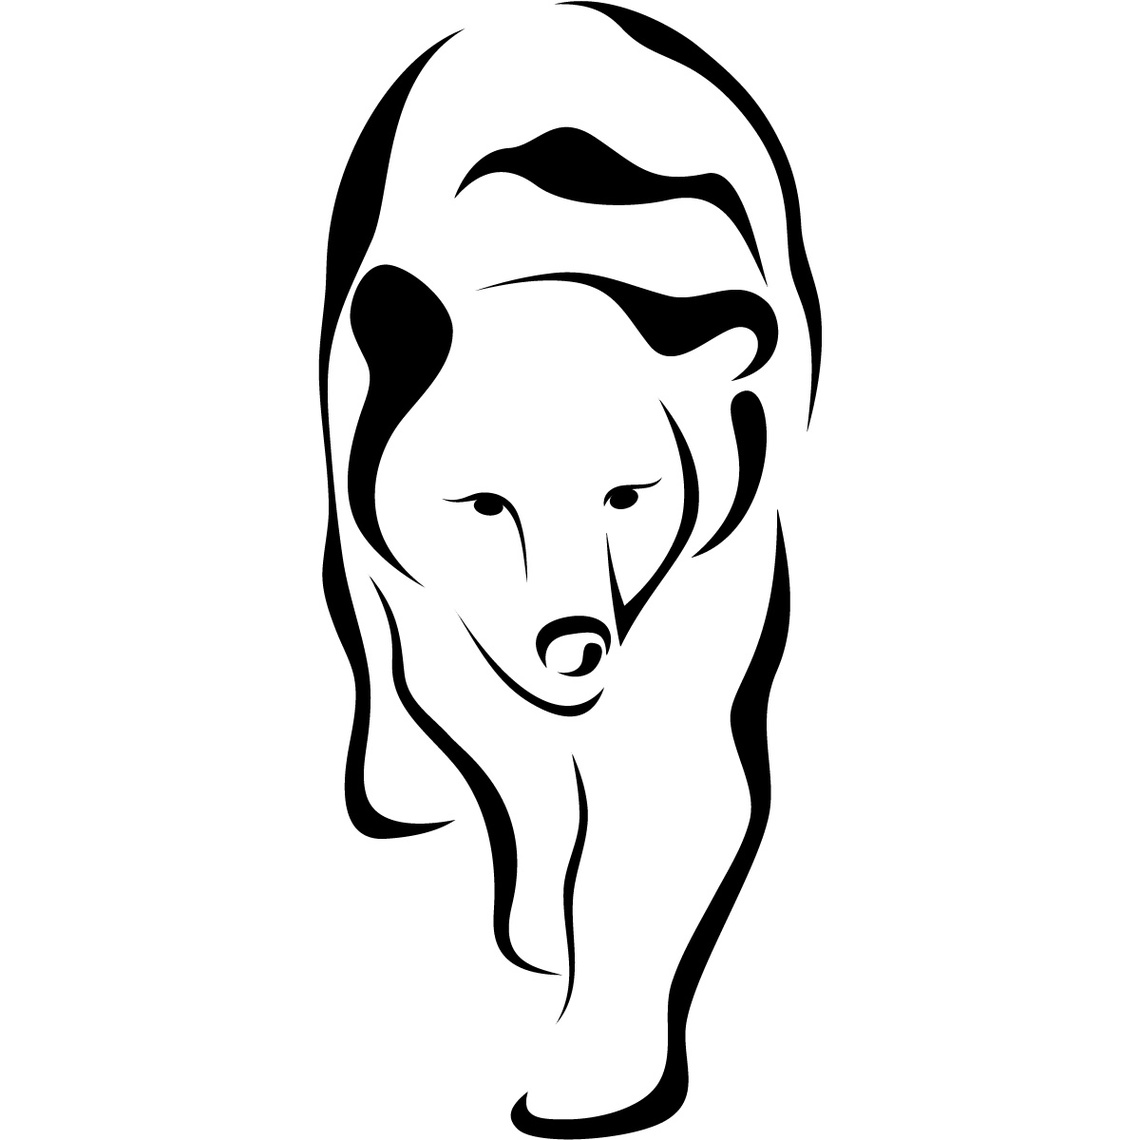 Grizzly Bear Outline Clipart - Free to use Clip Art Resource